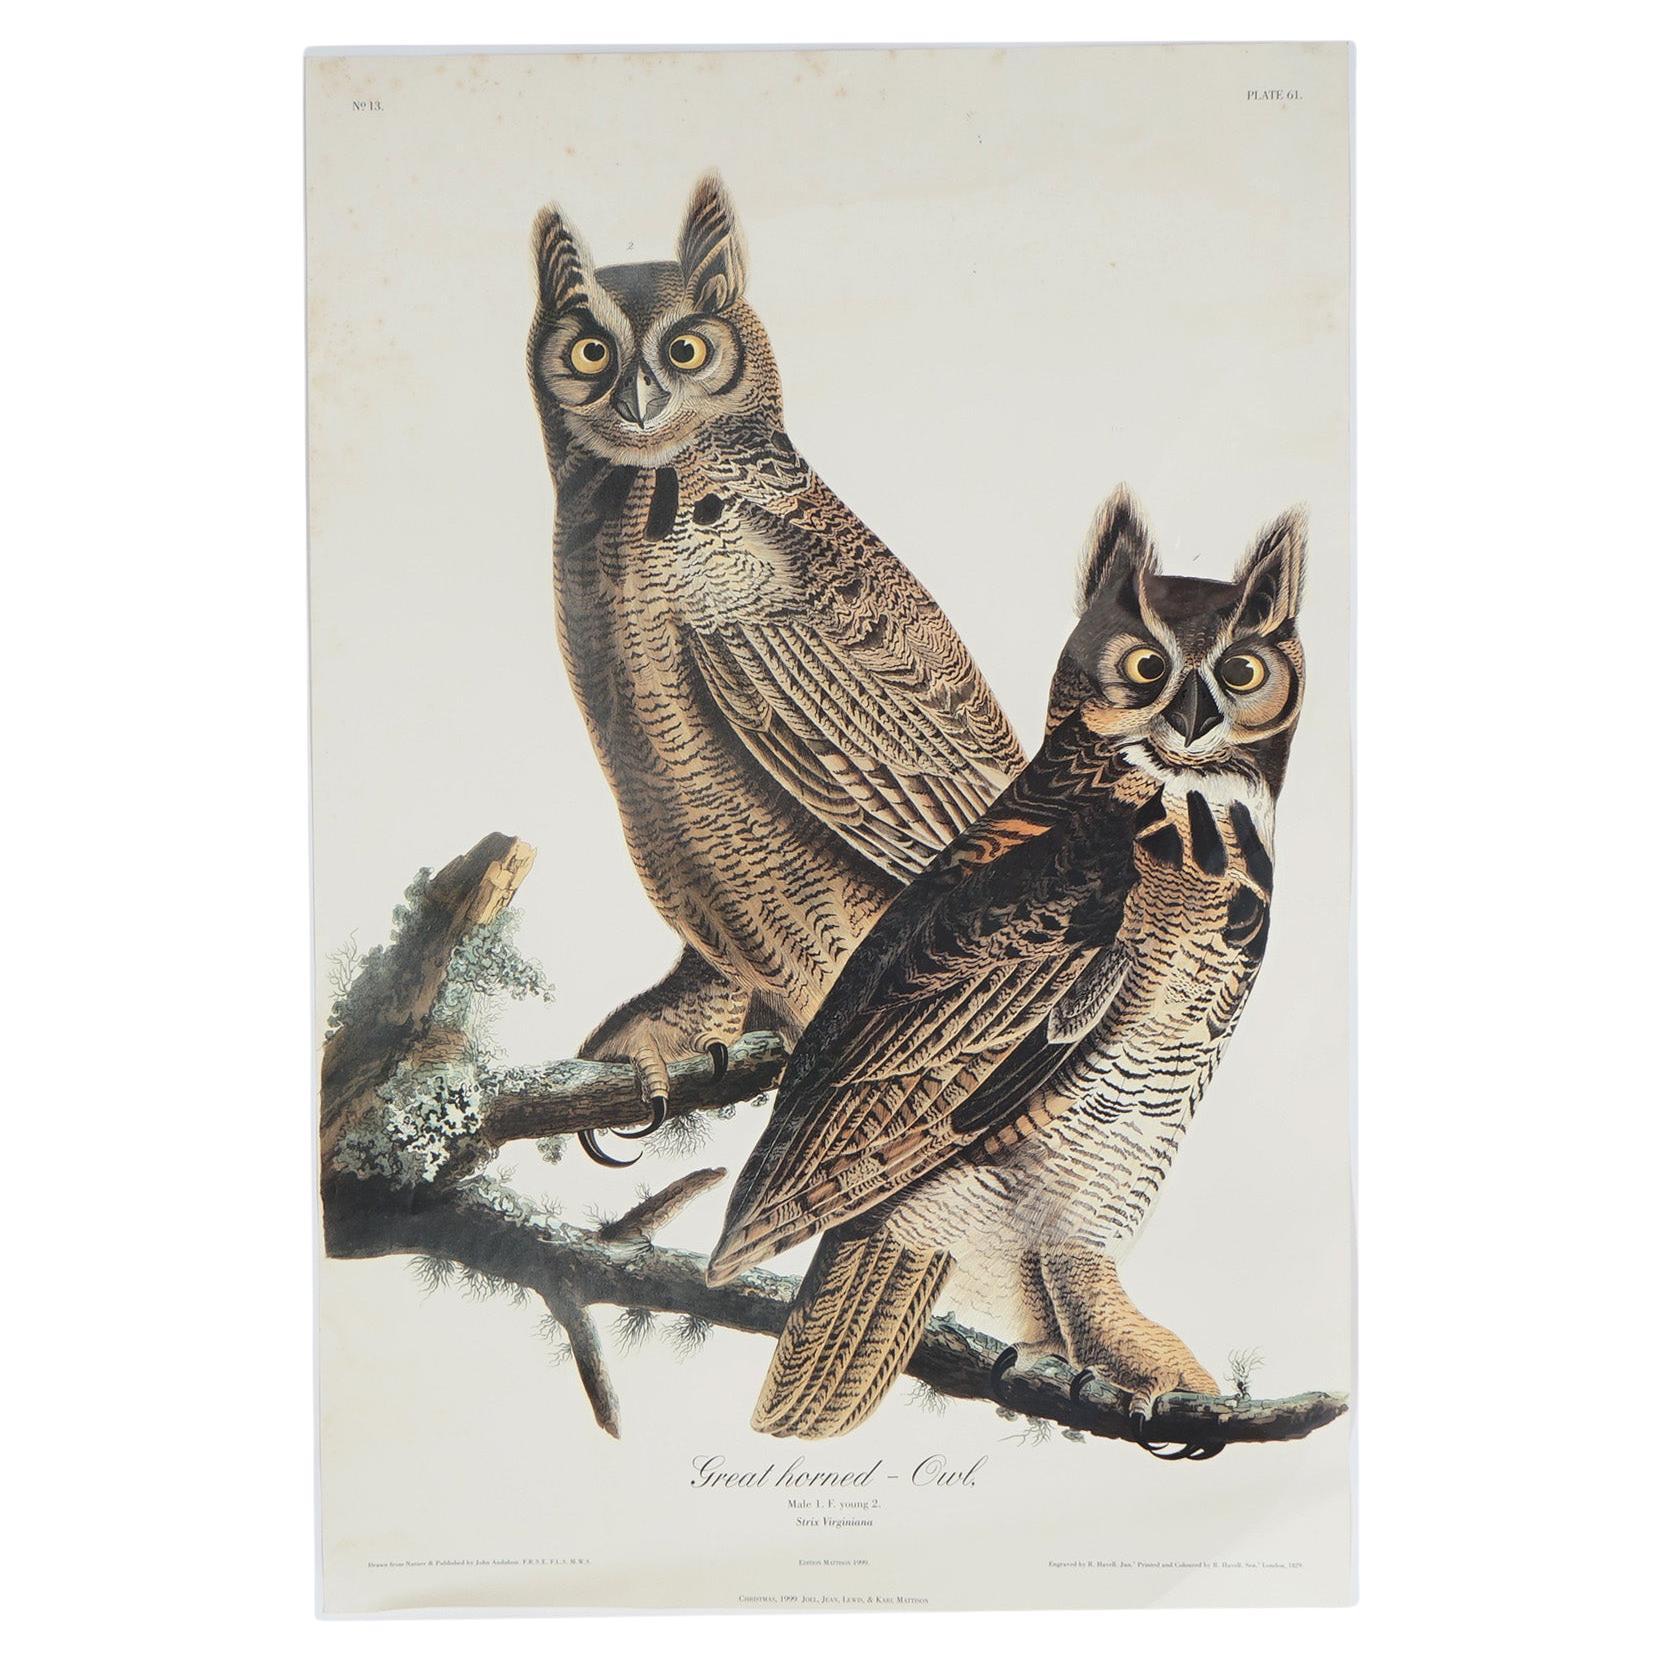 R. Havell Double Elephant Folio Audubon Print of Great Horned Owls C1999 For Sale